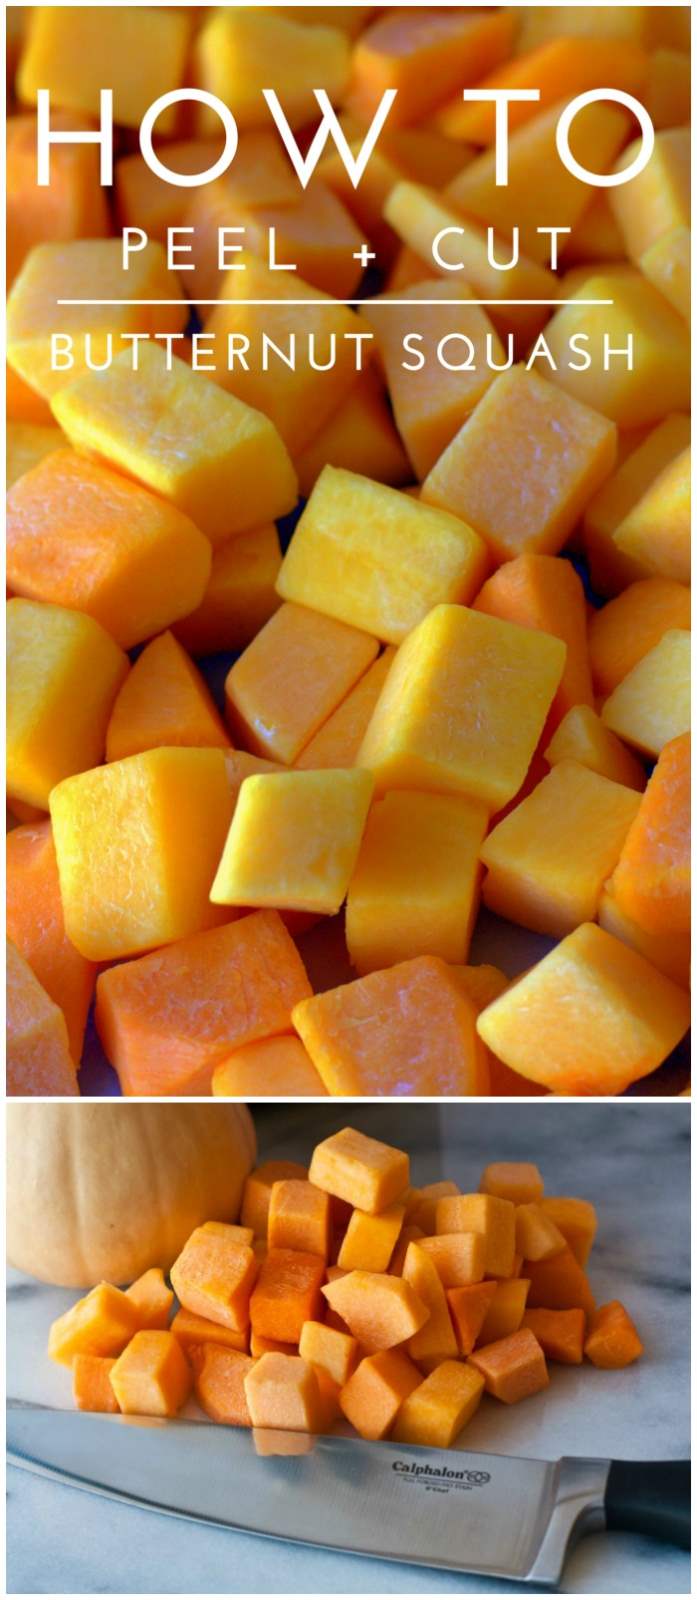 A collage of cut butternut squash with text overlay for Pinterest